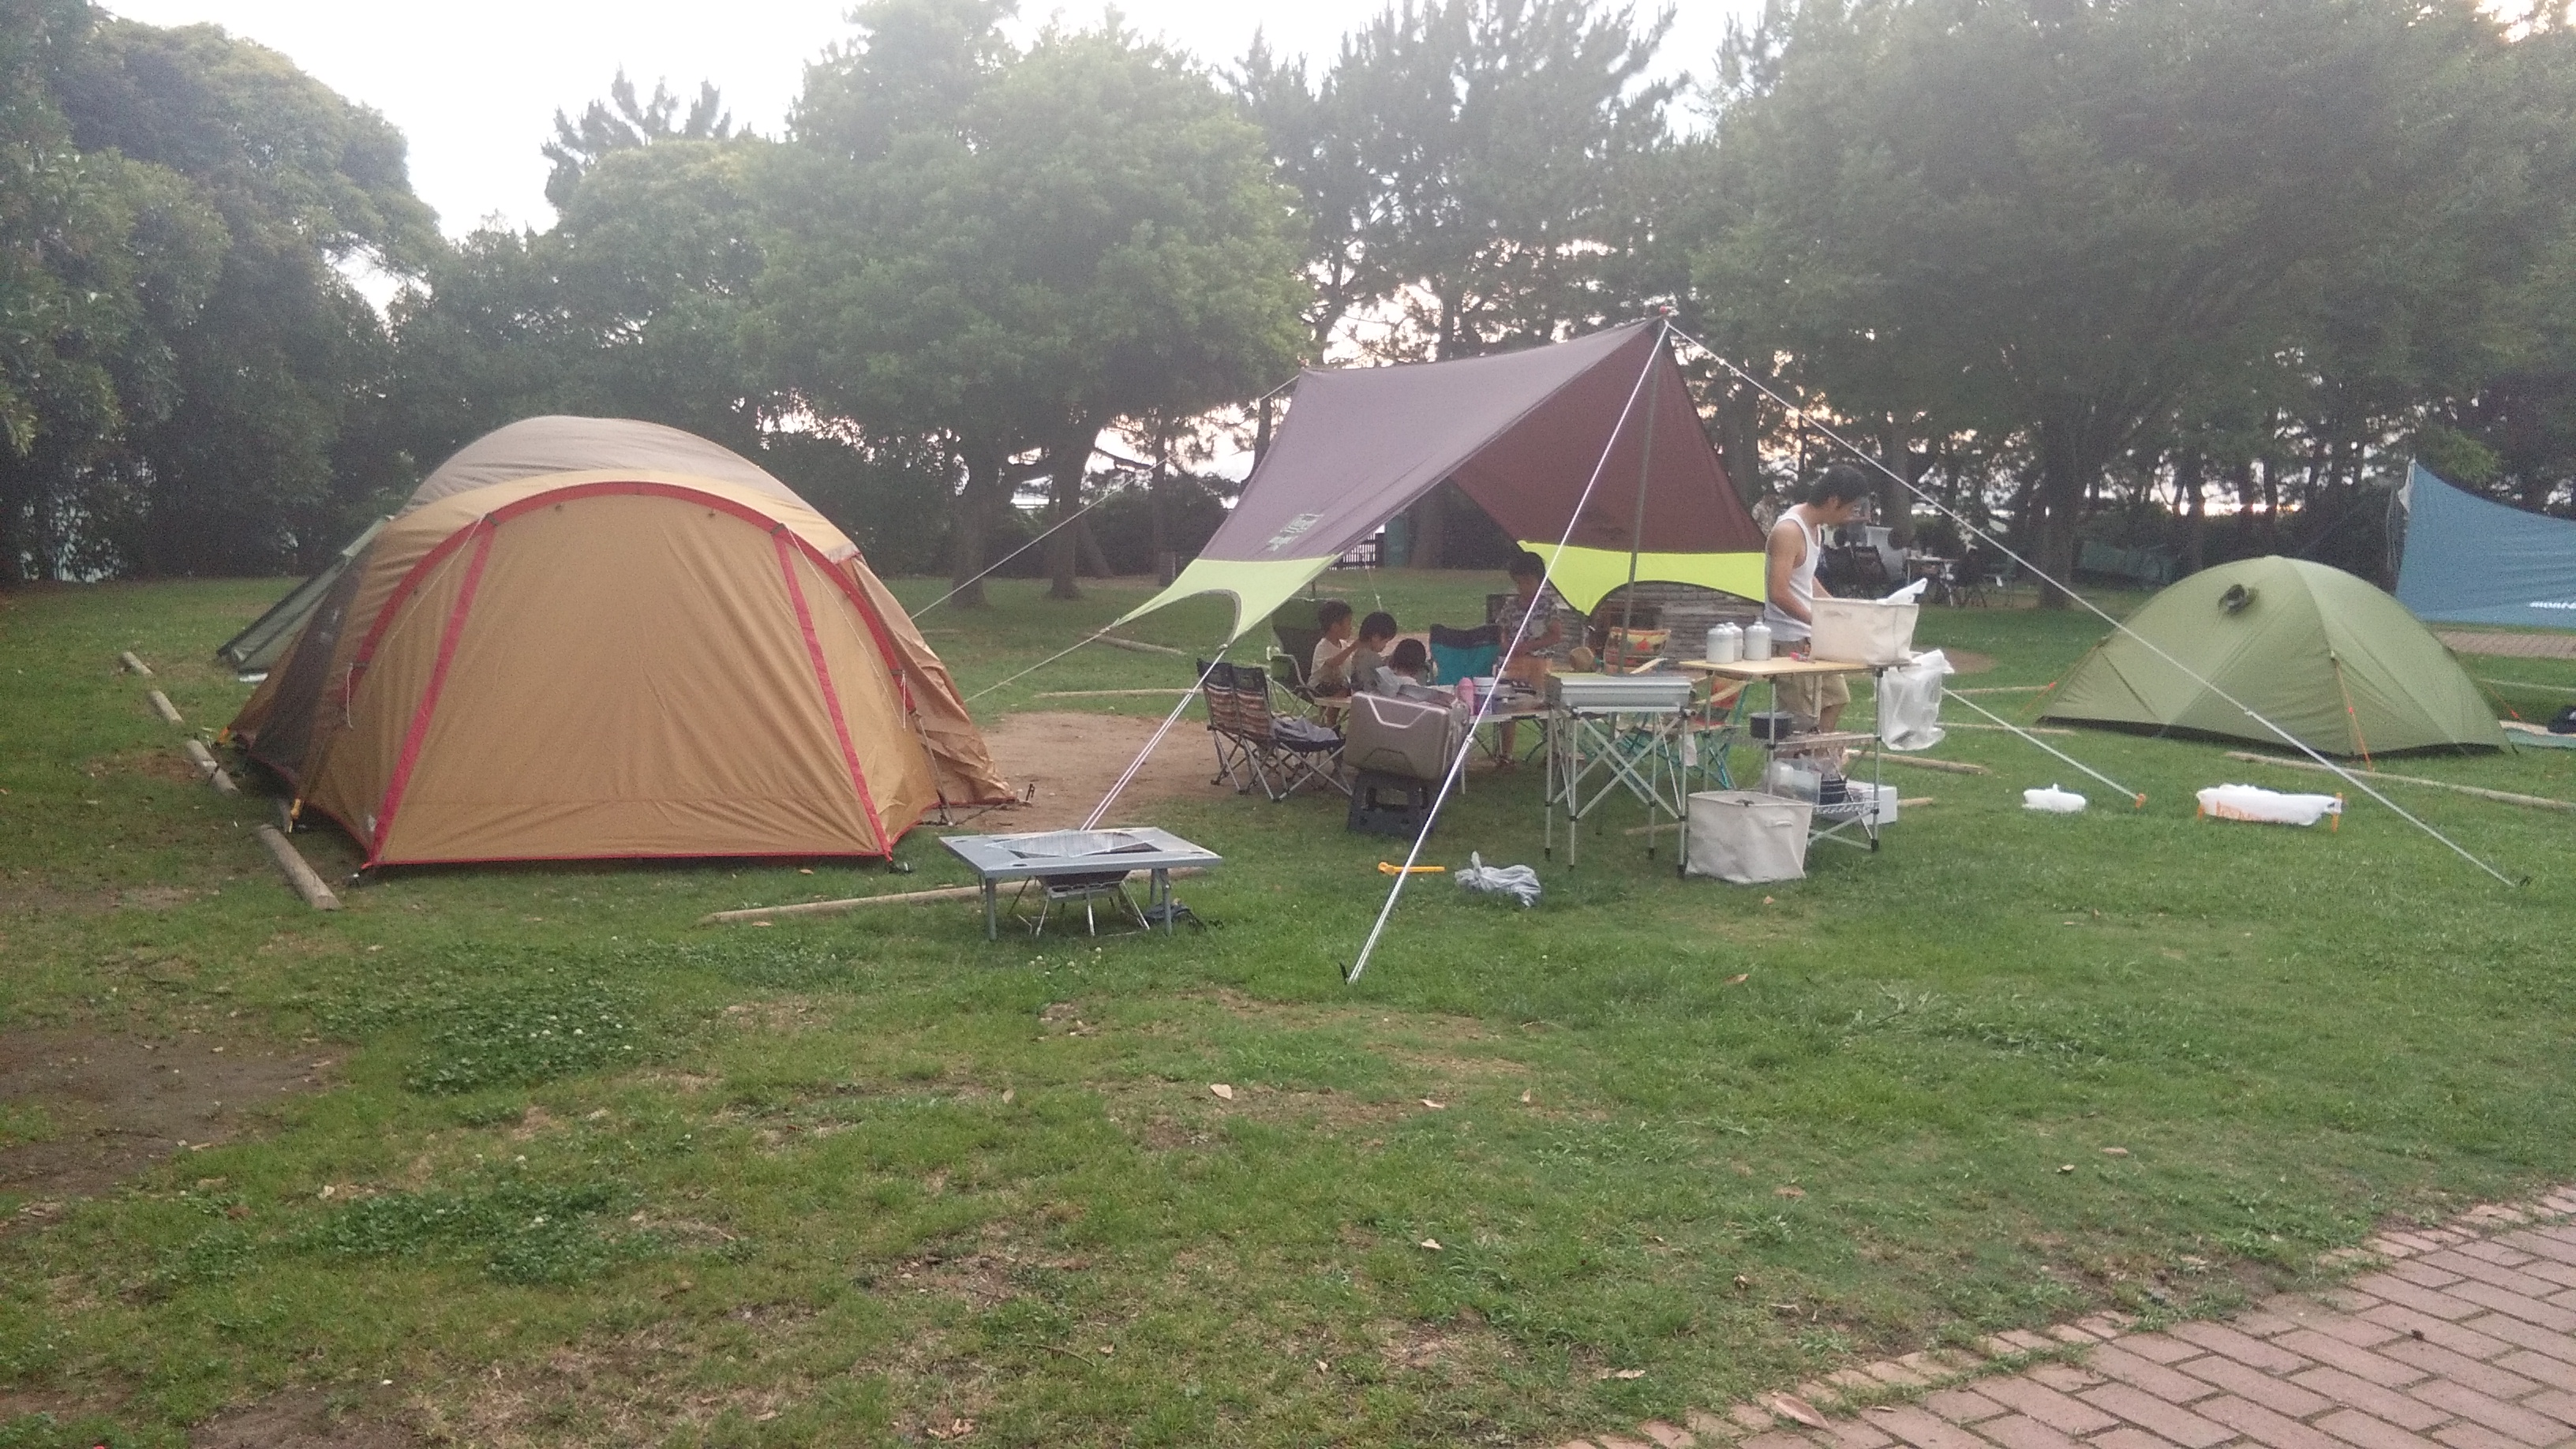 Japanese way of camping - bring your own house